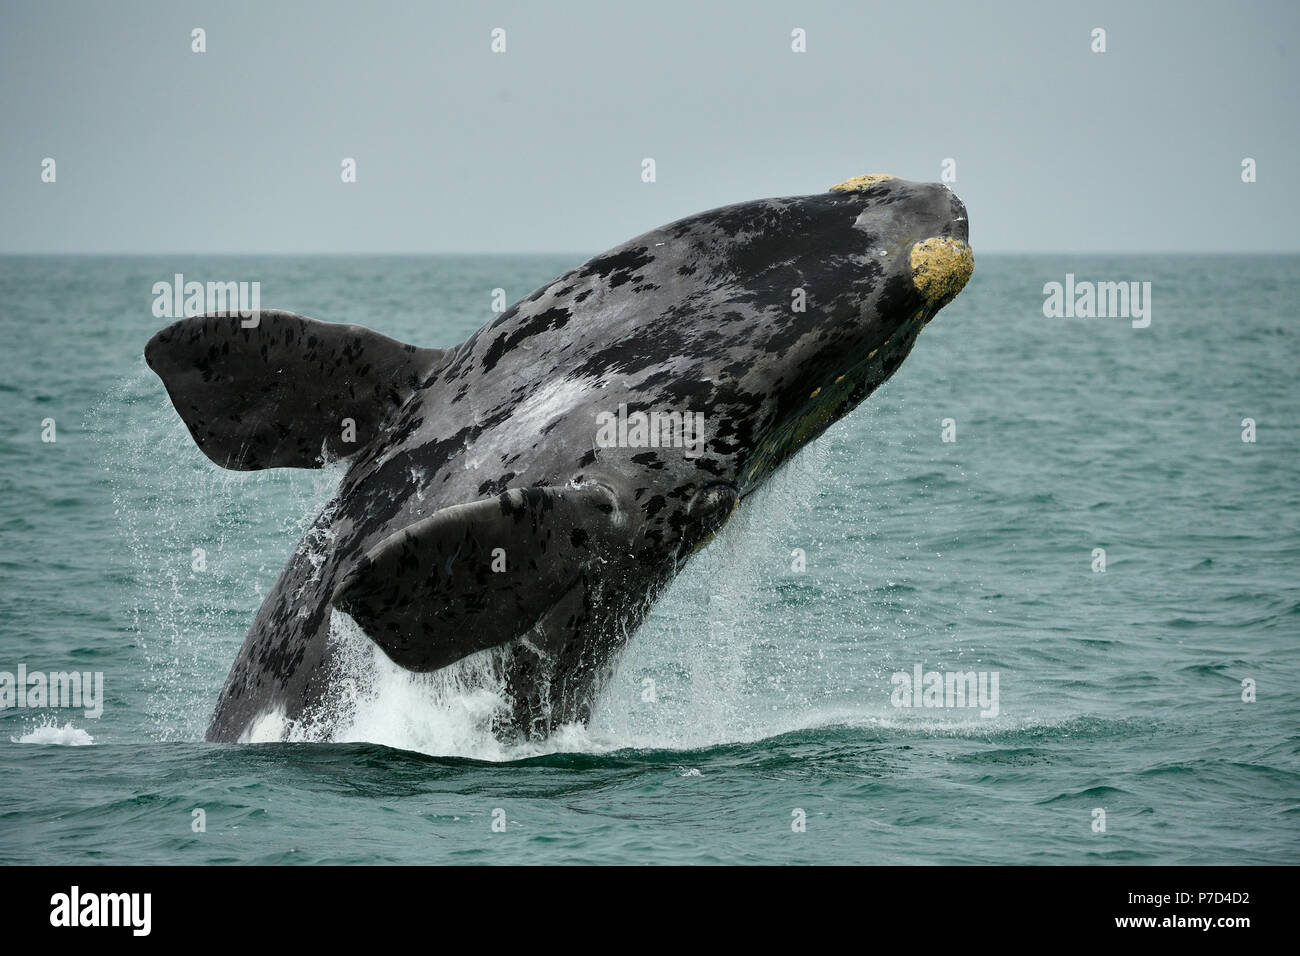 Southern right whale (Eubalaena glacialis), breaching, jumps out of the water, Lüderitz, Atlantic, Namibia Stock Photo